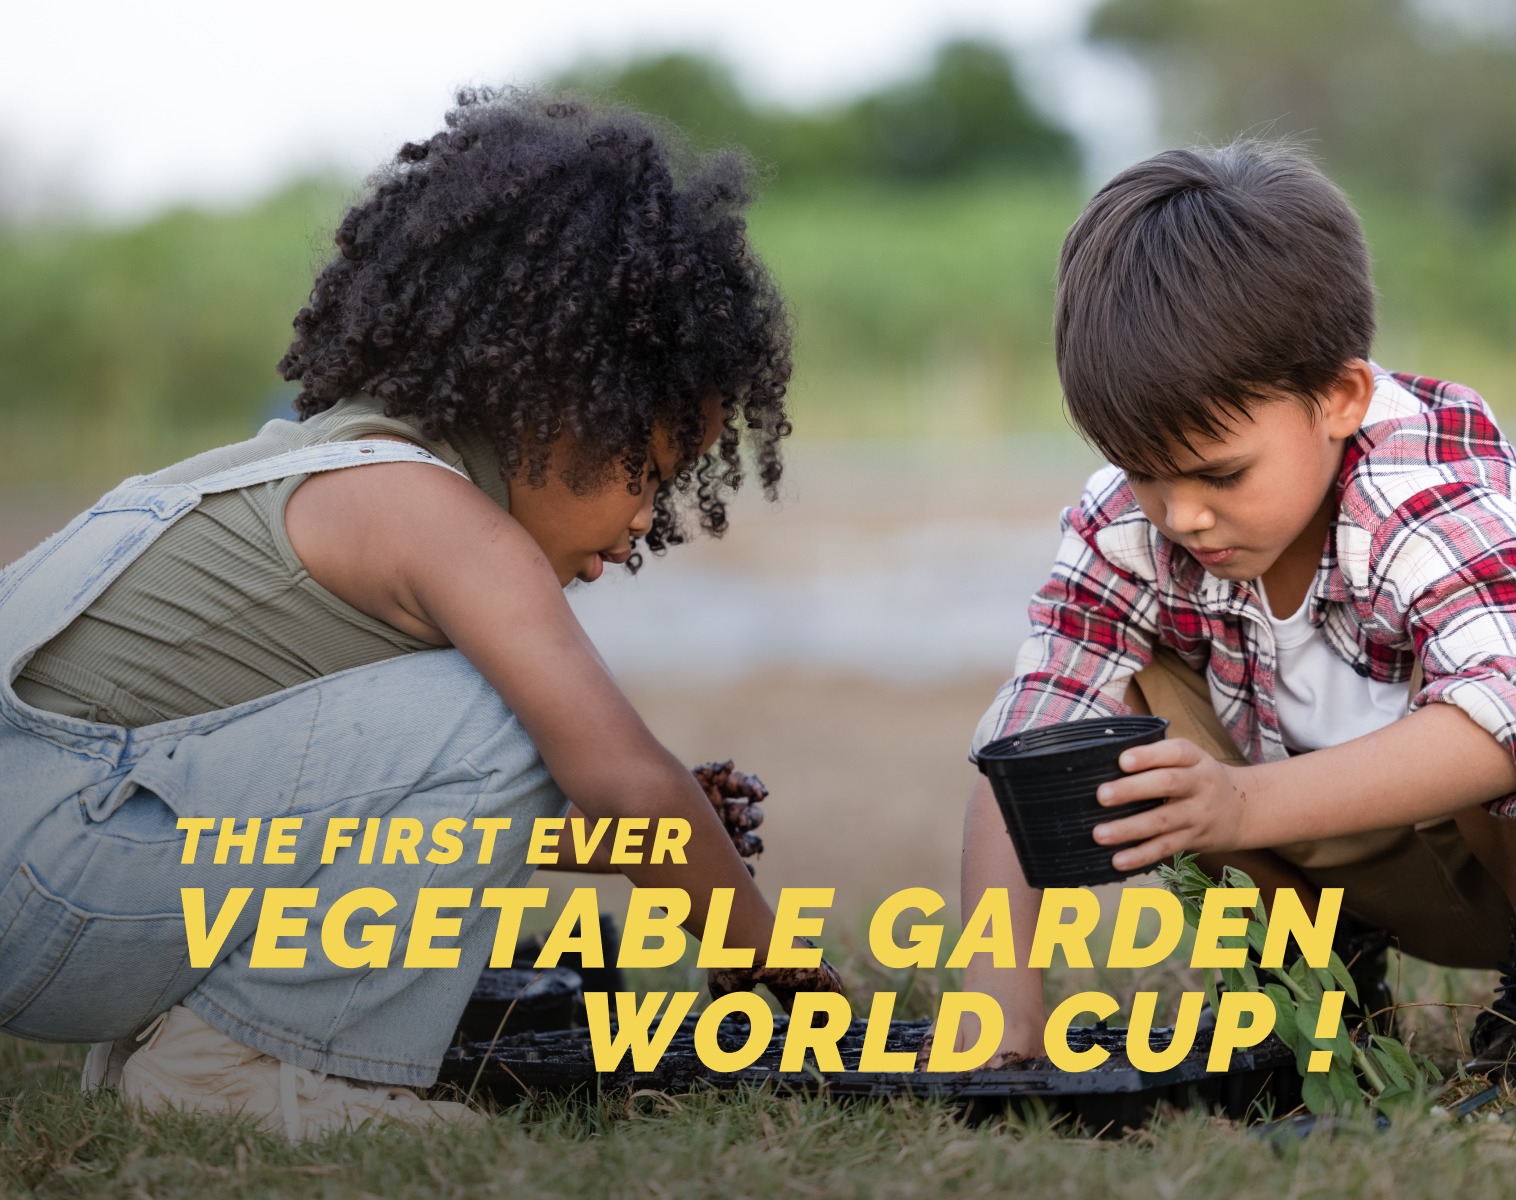 The first vegetable garden world cup